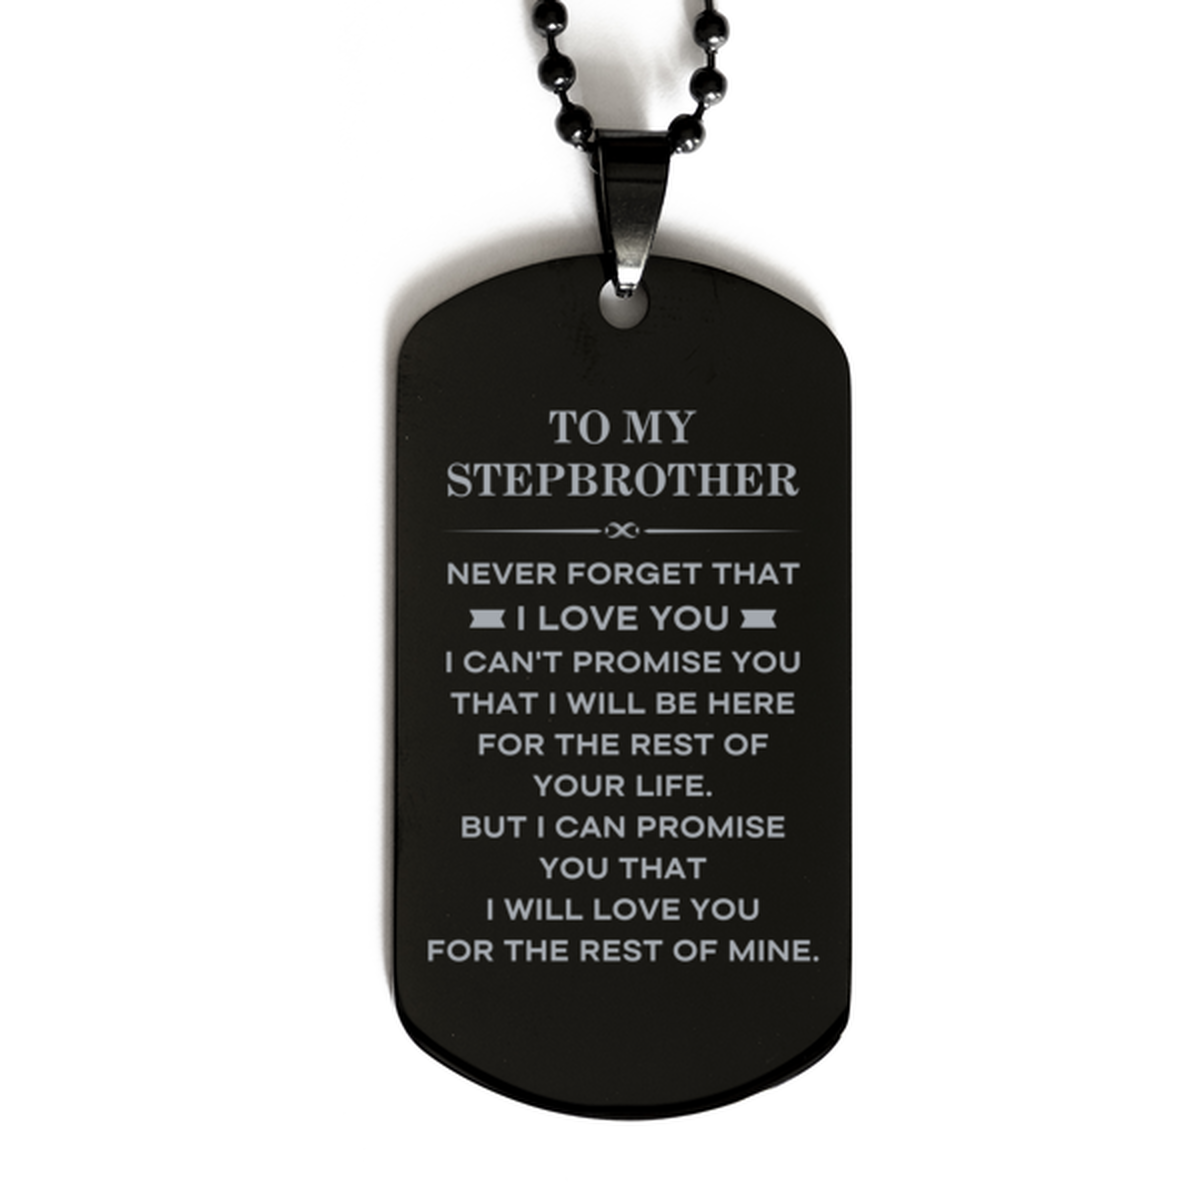 To My Stepbrother Gifts, I will love you for the rest of mine, Love Stepbrother Dog Tag Necklace, Birthday Christmas Unique Black Dog Tag For Stepbrother